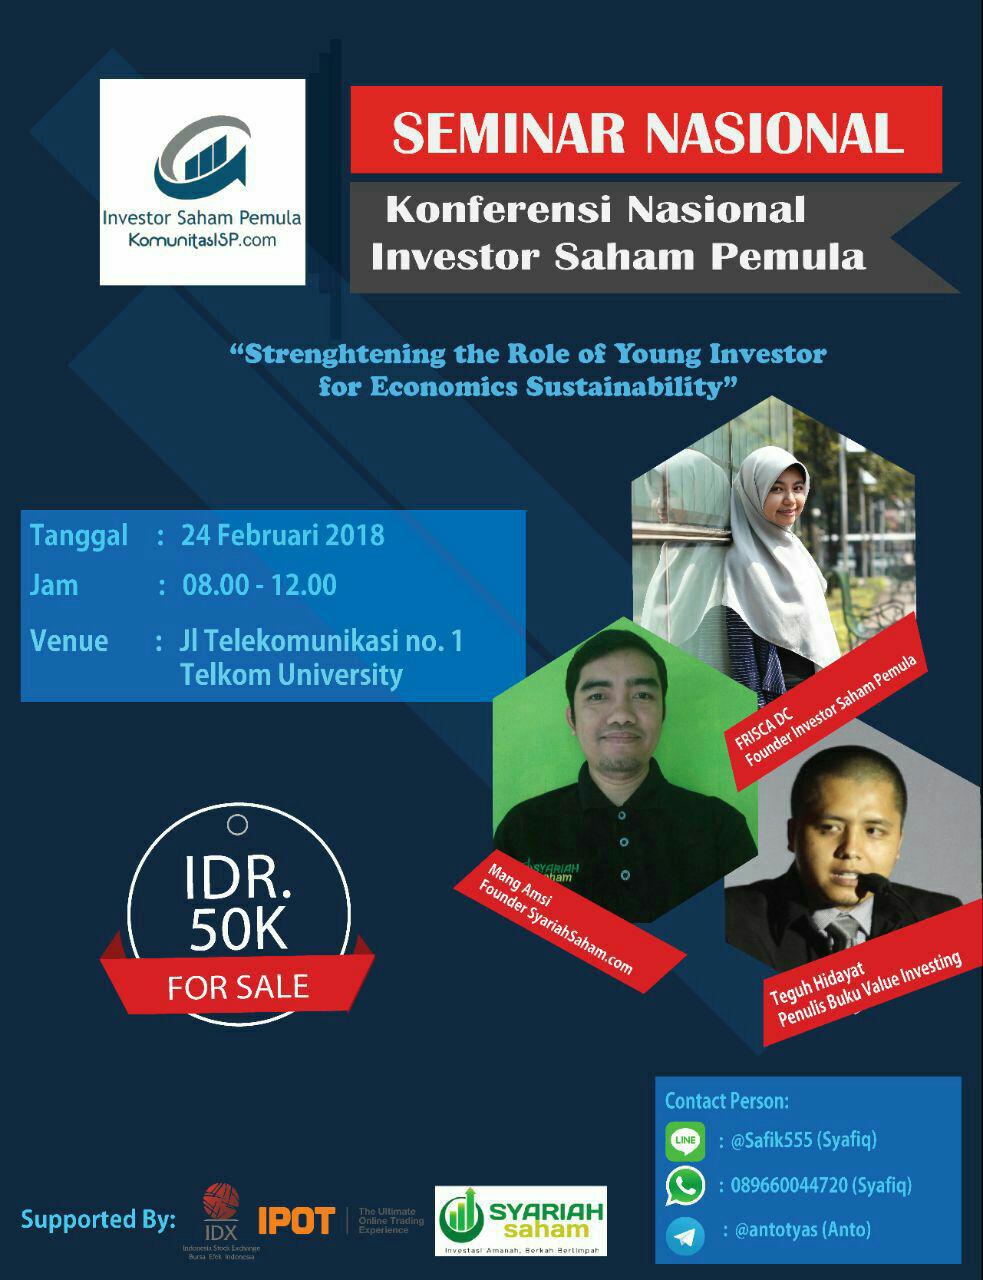 [SEMINAR NASIONAL] Strengthening the Role of Young Investor for